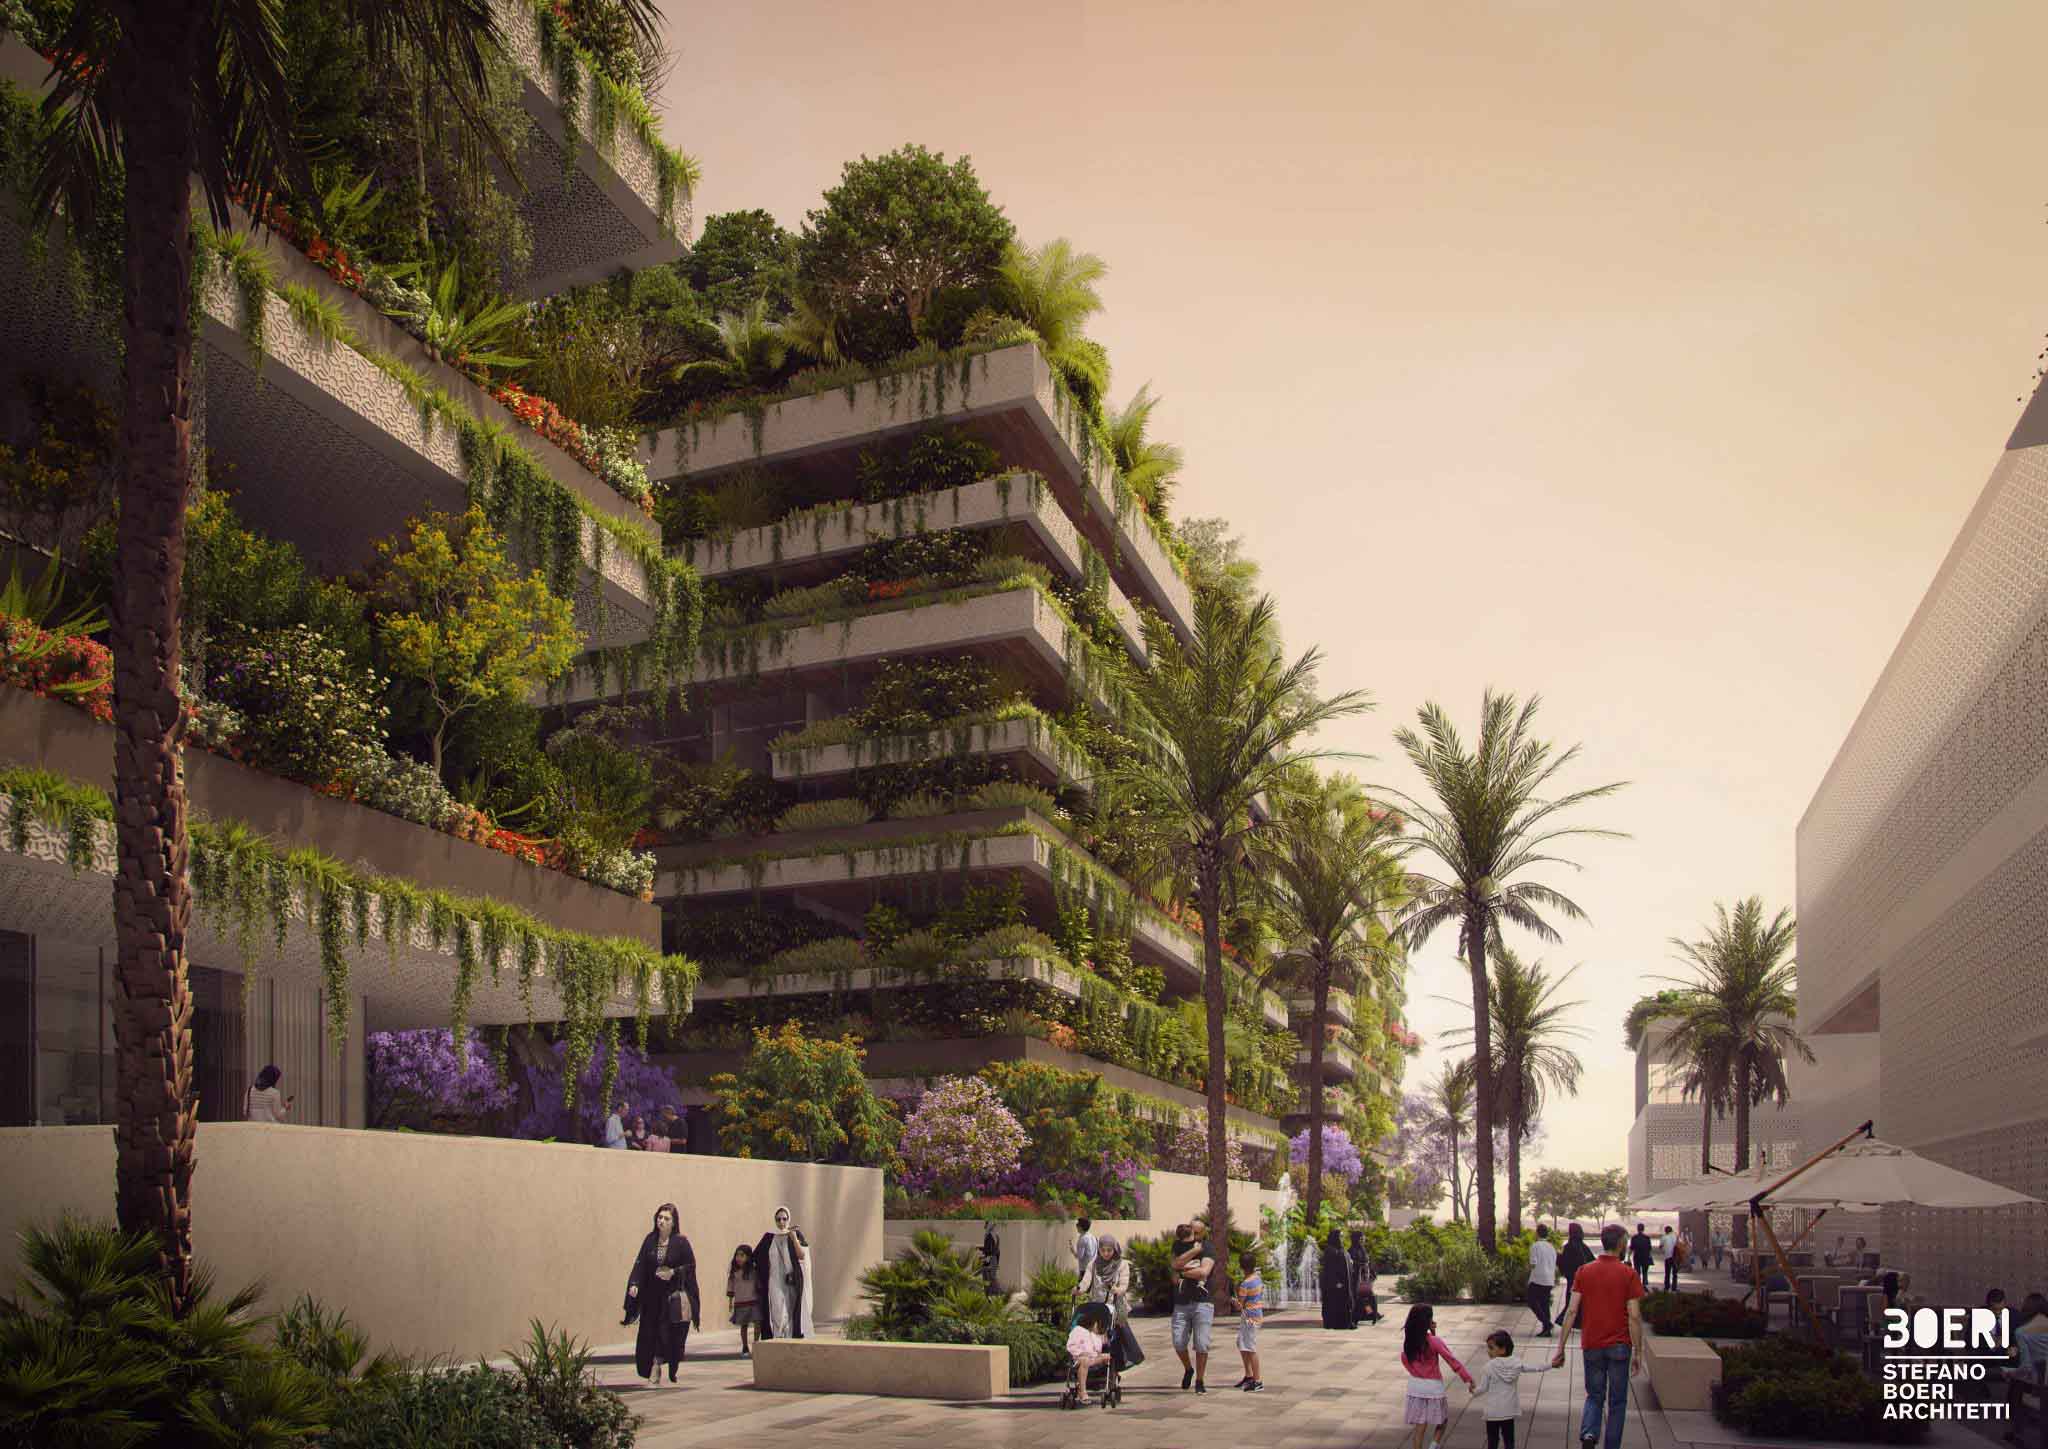 It is expected that the new Vertical Forests will be able to absorb about 7 tons of carbon dioxide per year and produce 8 tons of oxygen, contributing substantially to counteracting the pollution and the effects of climate change.